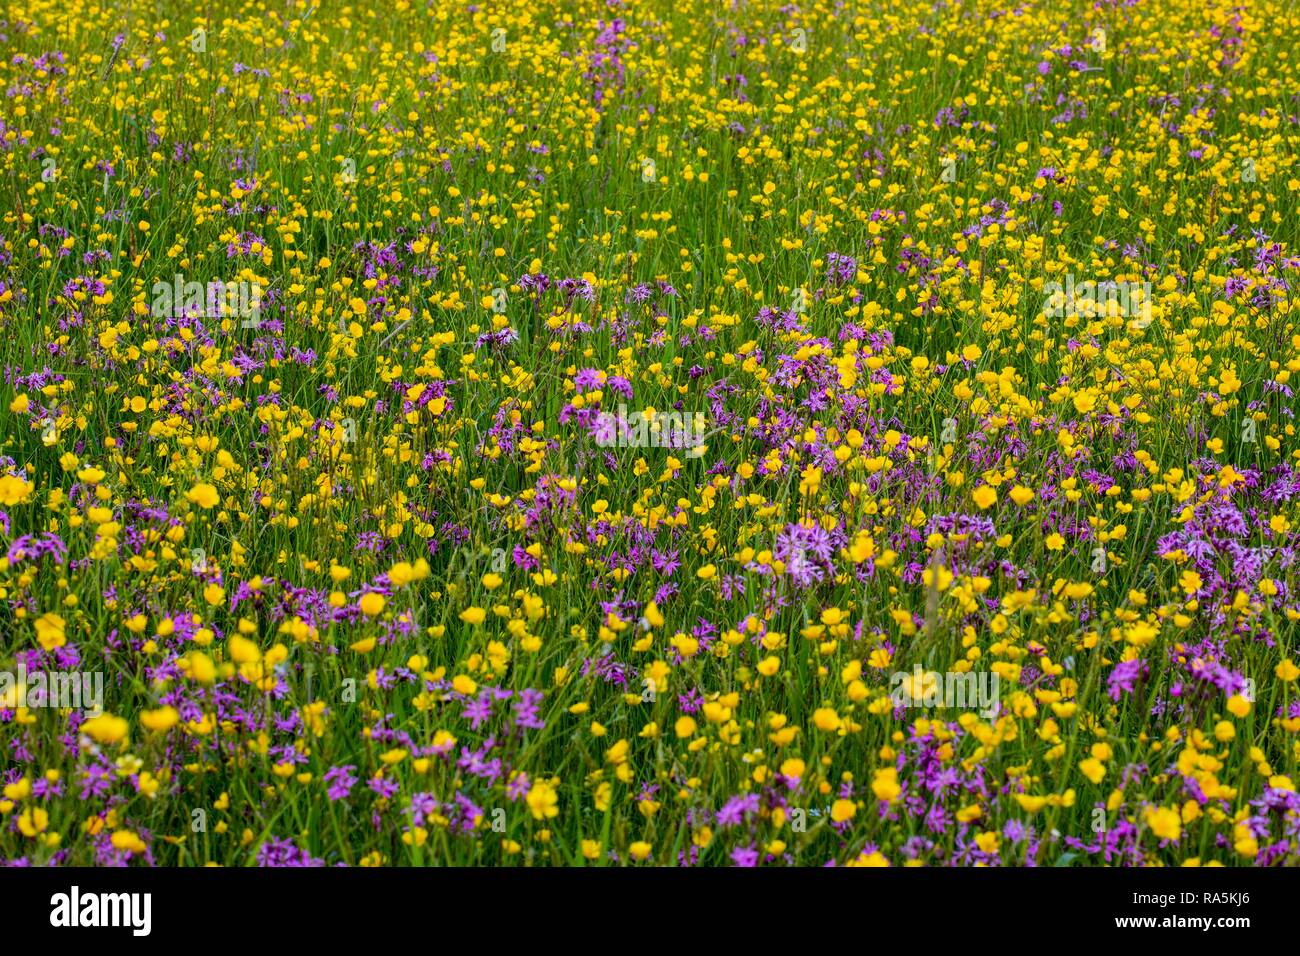 Wild flowers, Buttercup (Ranunculus acris) and Ragged Robin (Lychnis flos-cuculi), Quebec, Canada Stock Photo